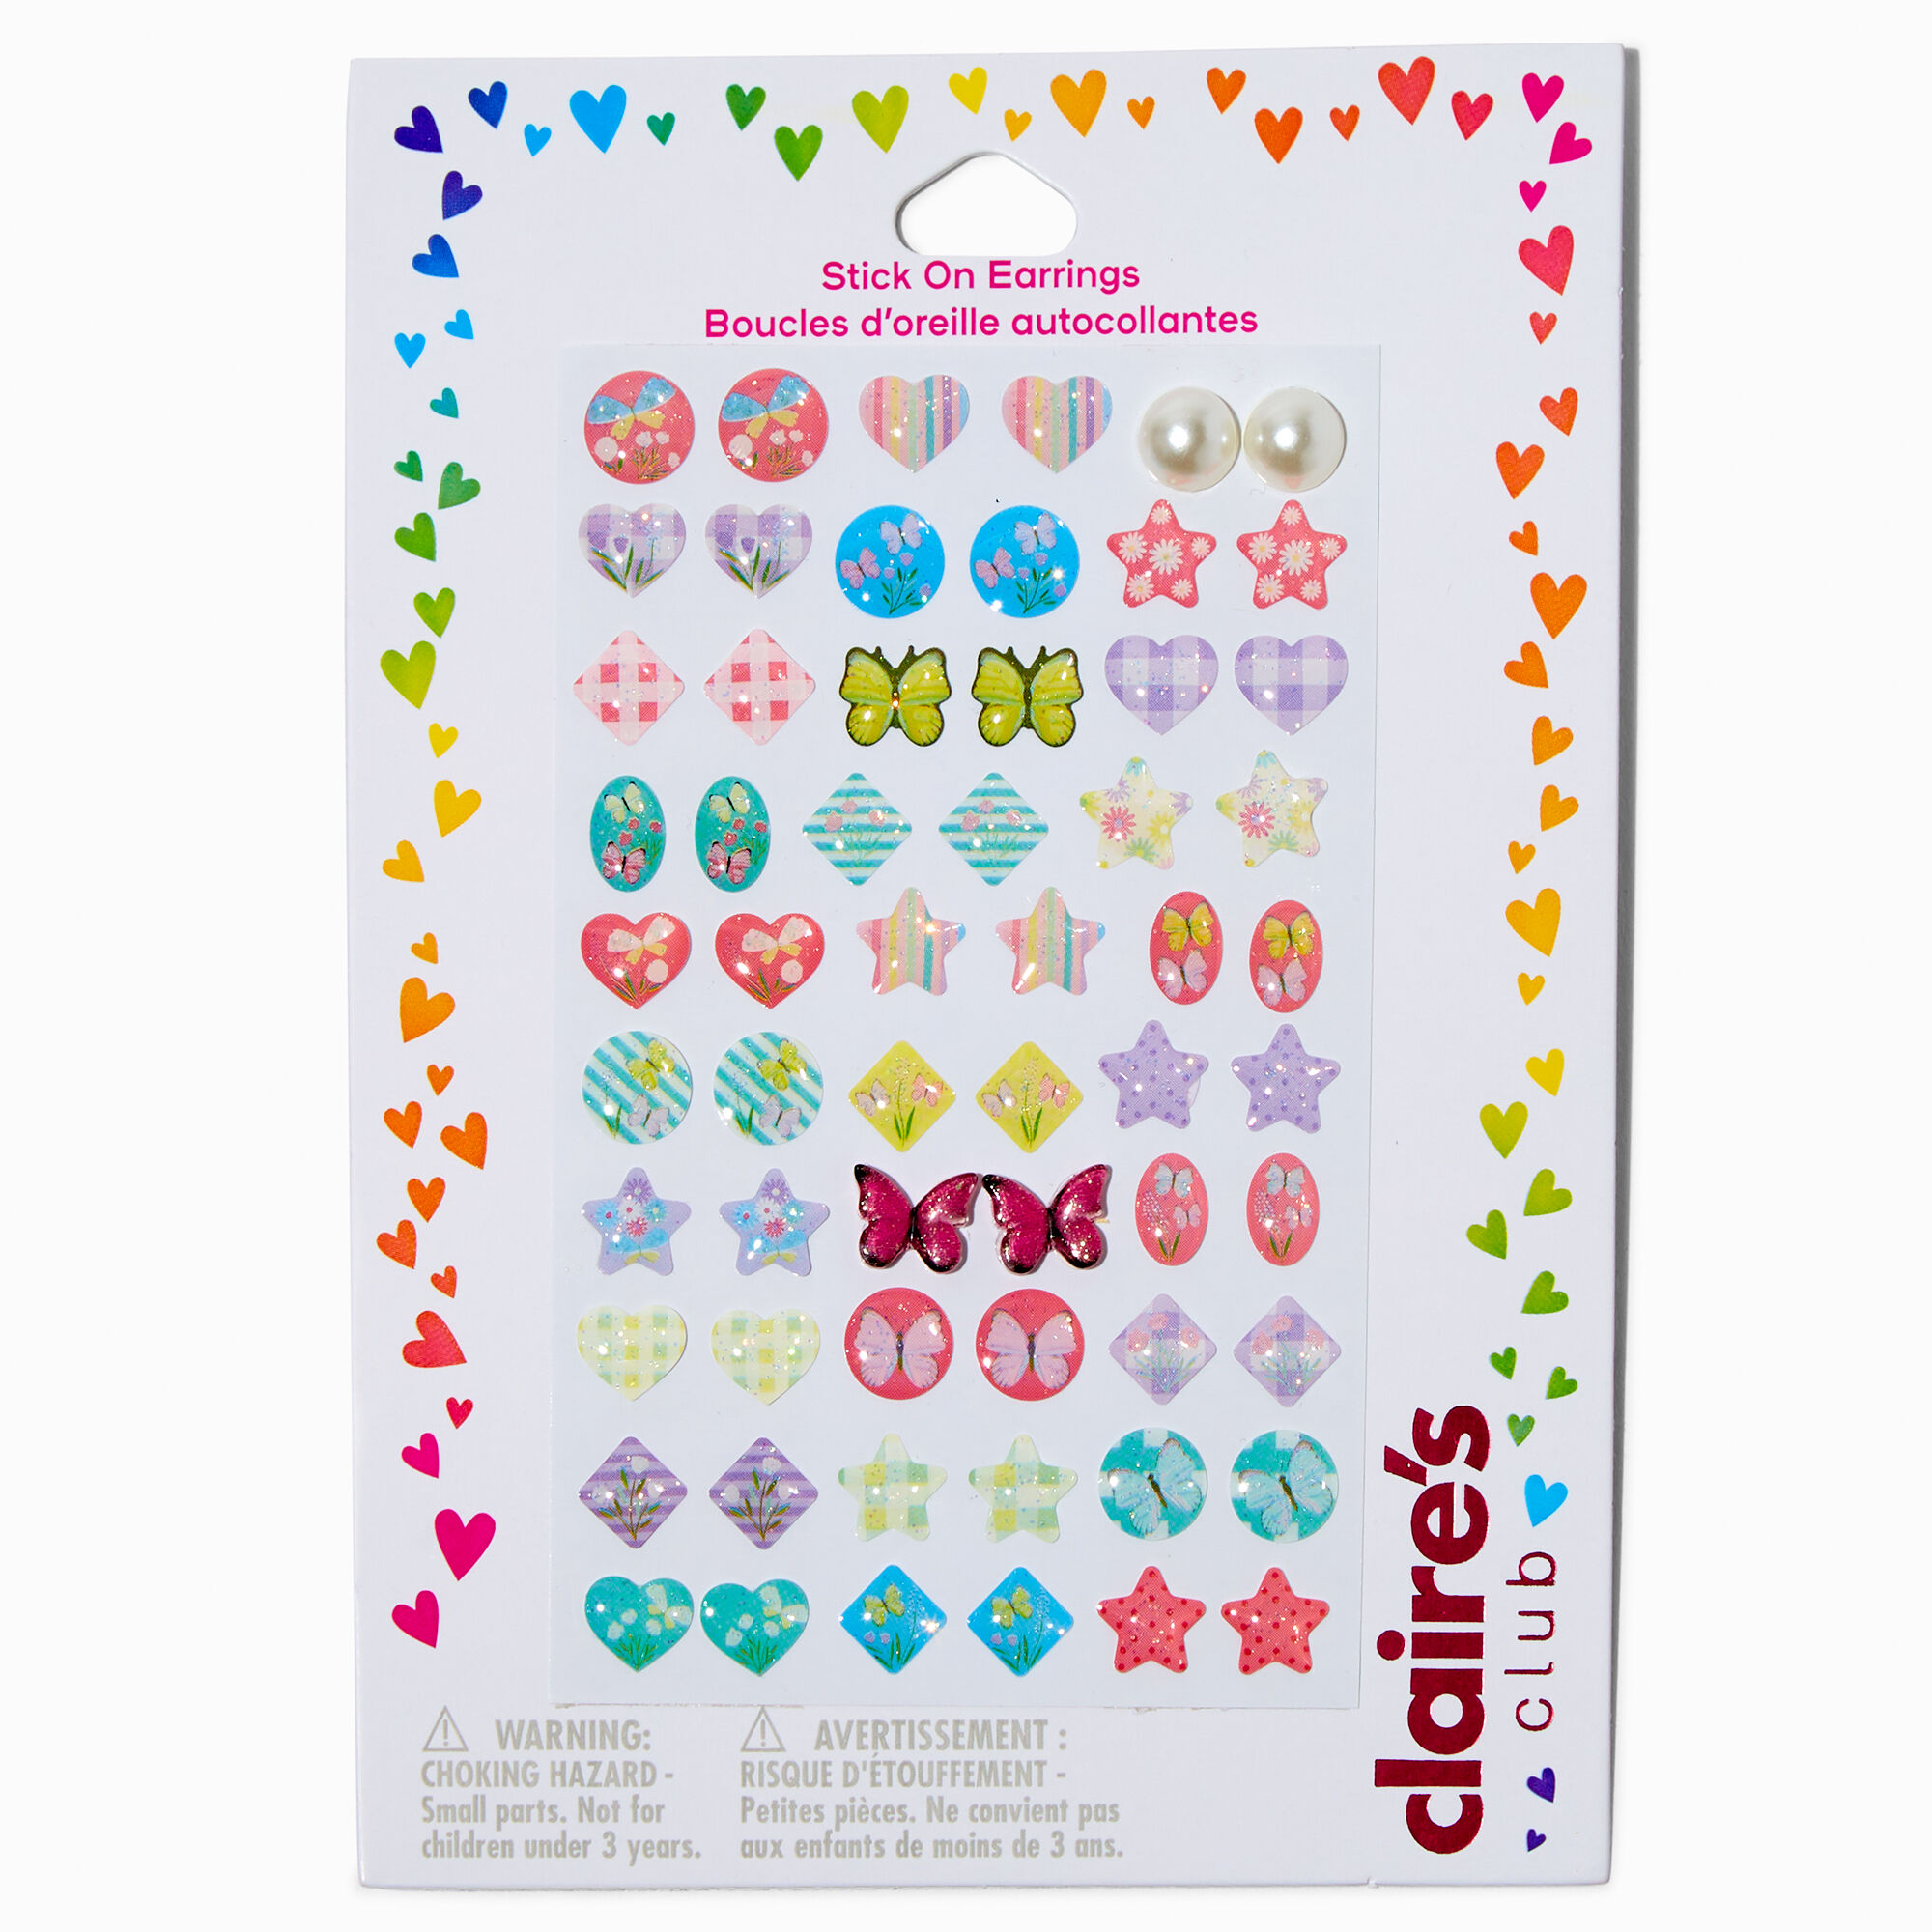 View Claires Club Pastel Spring Stick On Earrings 30 Pack information